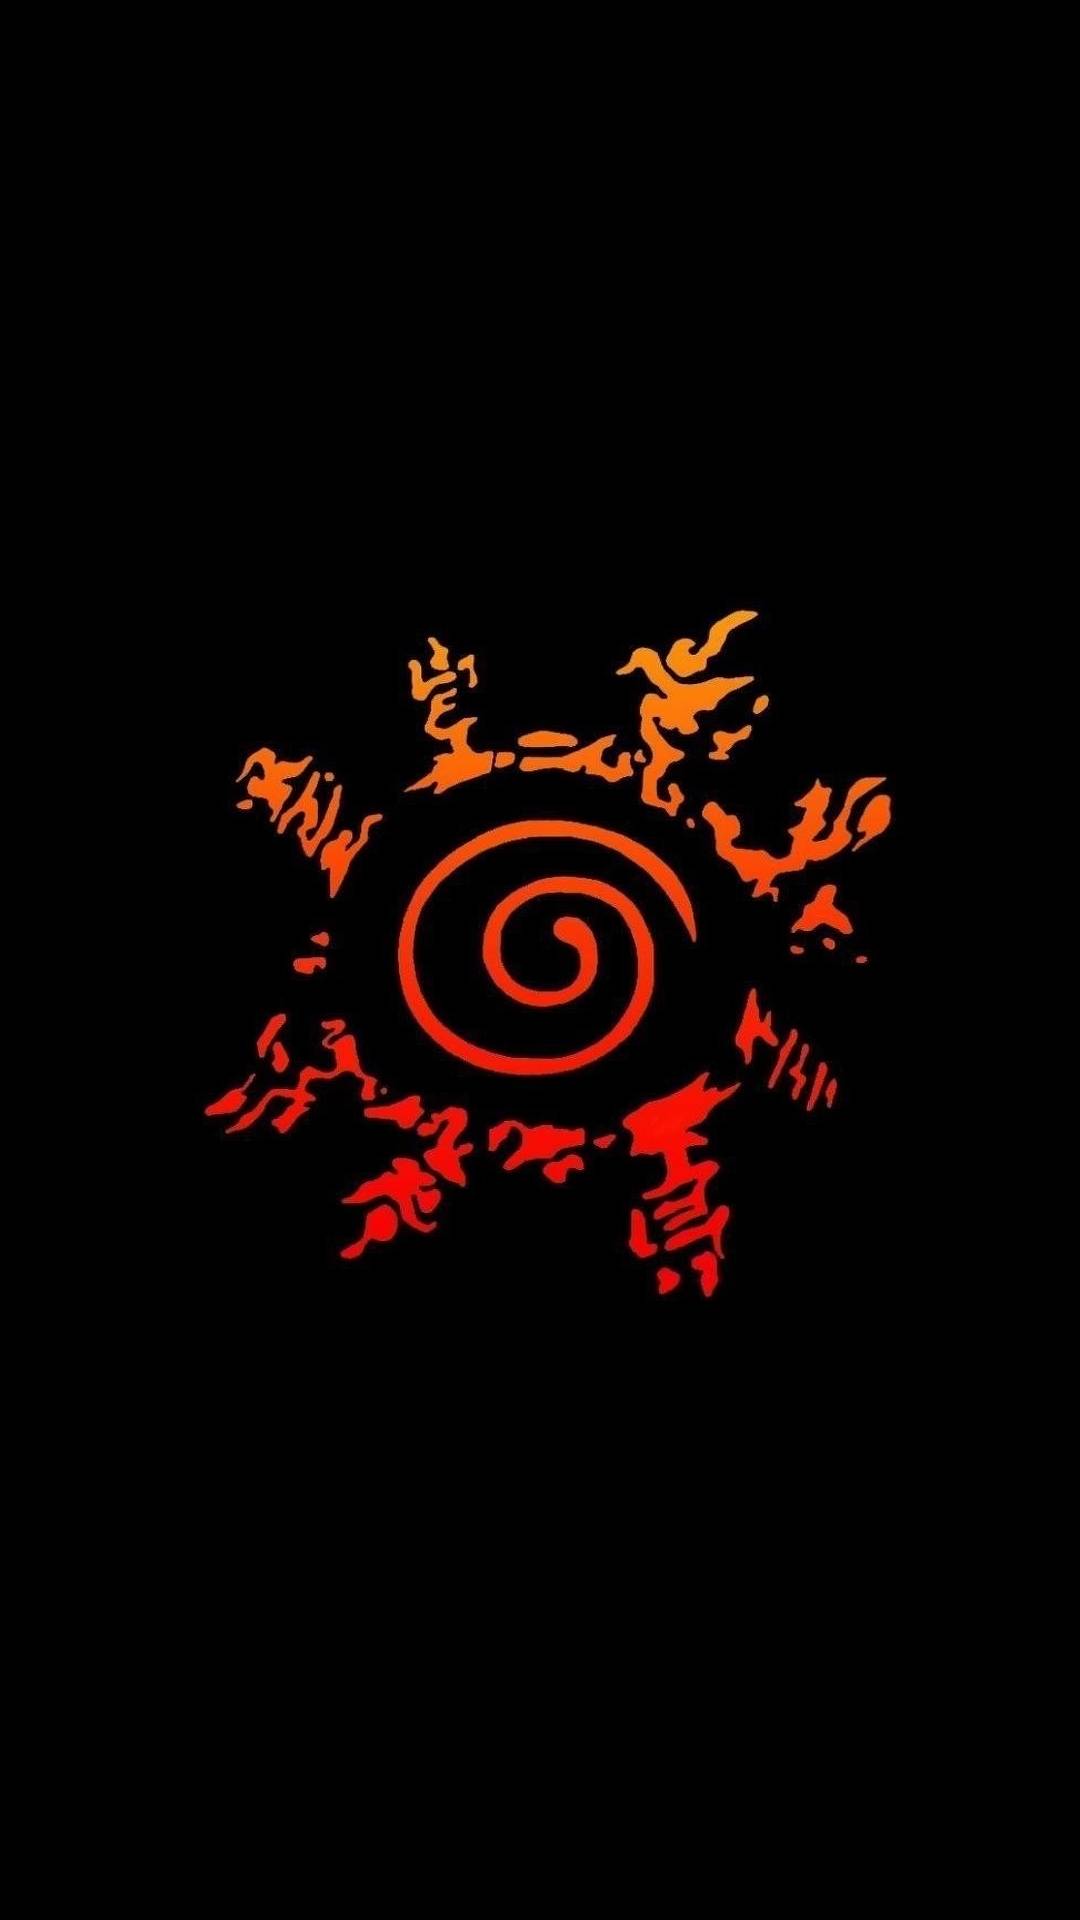 Naruto Wallpaper, Neville Moraes, Free Download, Borrow, and Streaming, Internet Archive